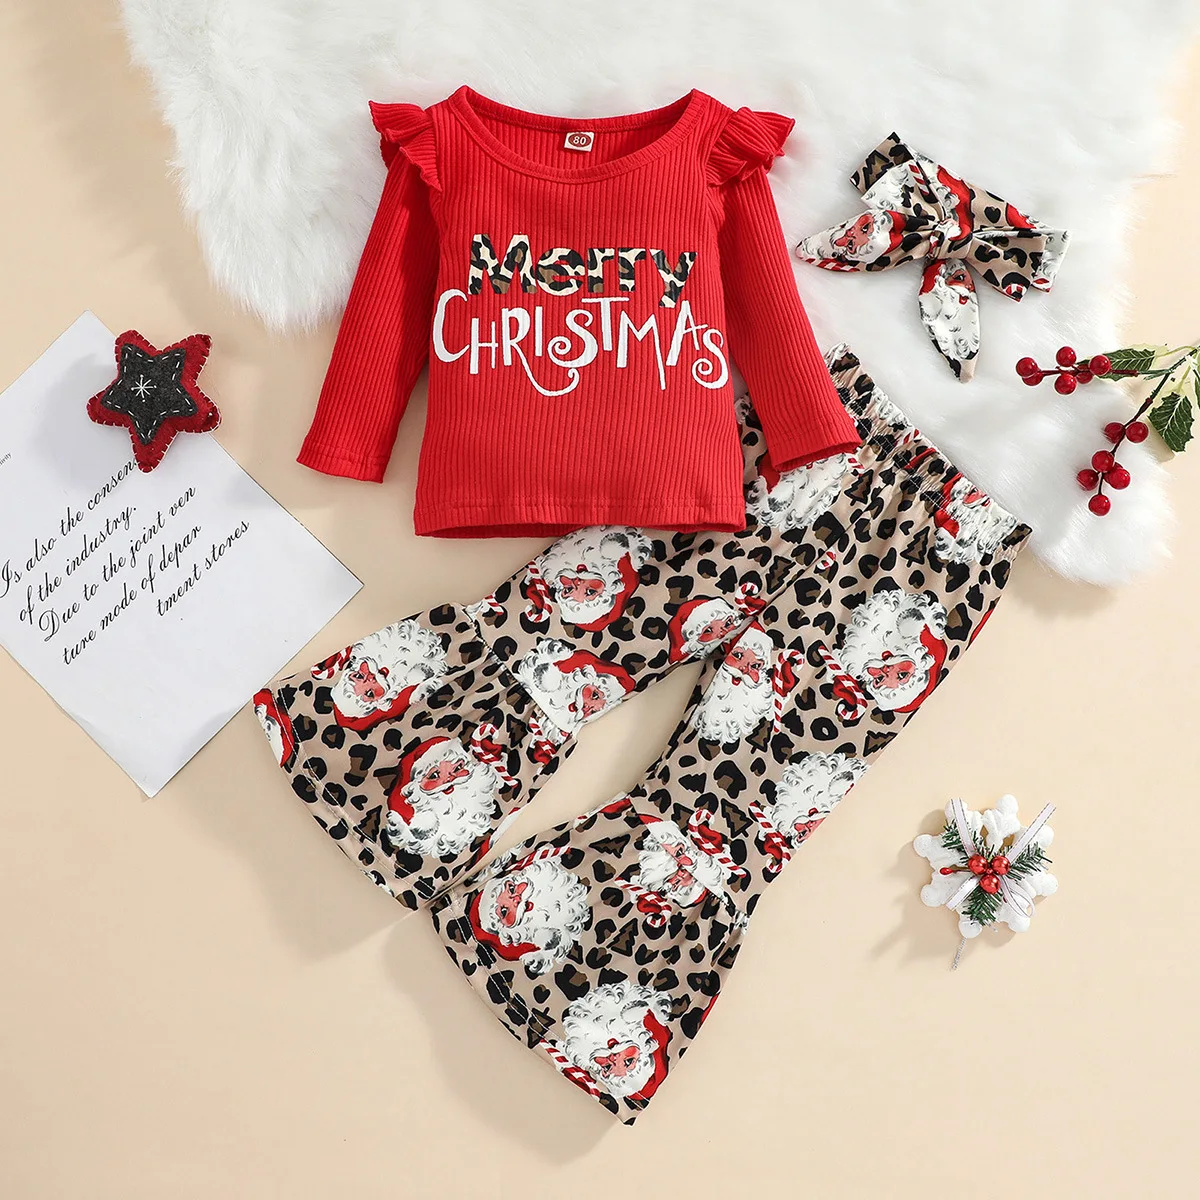 

2022 Kids Boutique Toddler Girl Christmas Outfit 2 Piece Set Rib Cotton Xmas Wear Baby Designer Clothes Bell Bottoms